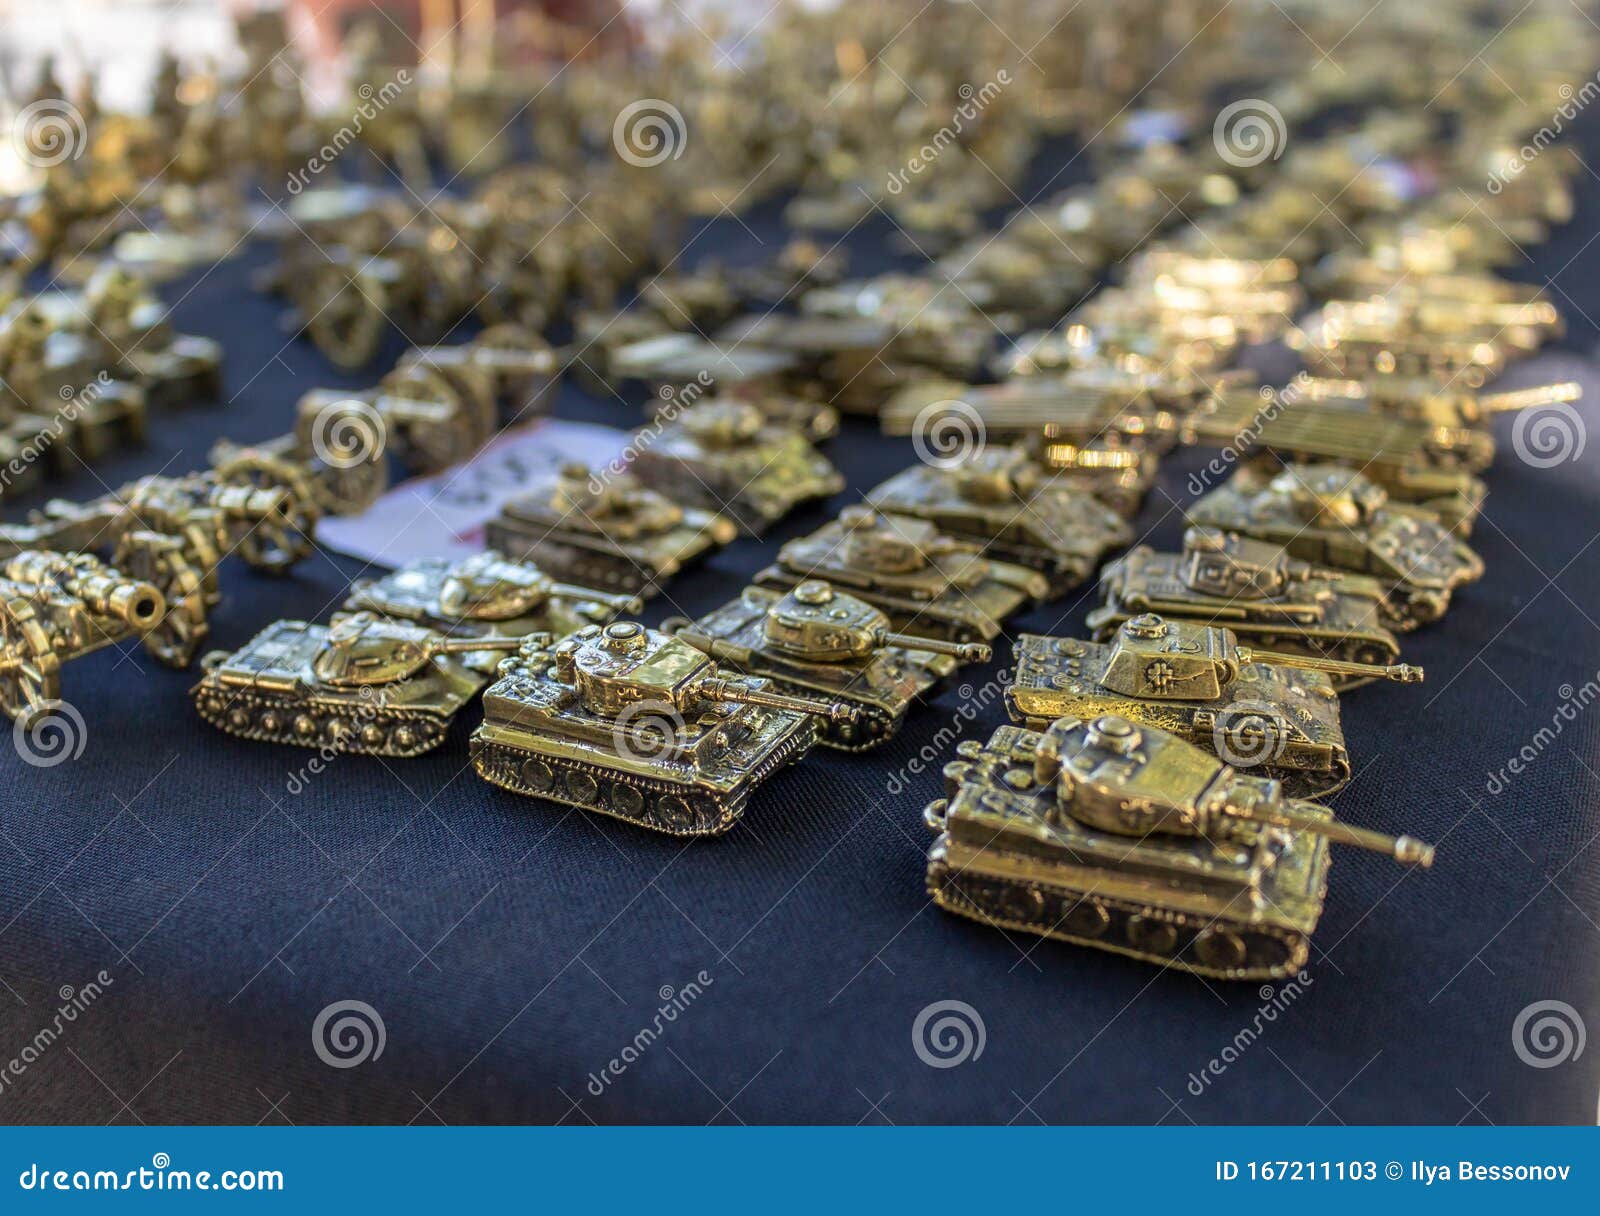 Aluminum Figures Fascist Tanks on the Table for Sale To Tourists Stock Image Image of medium: